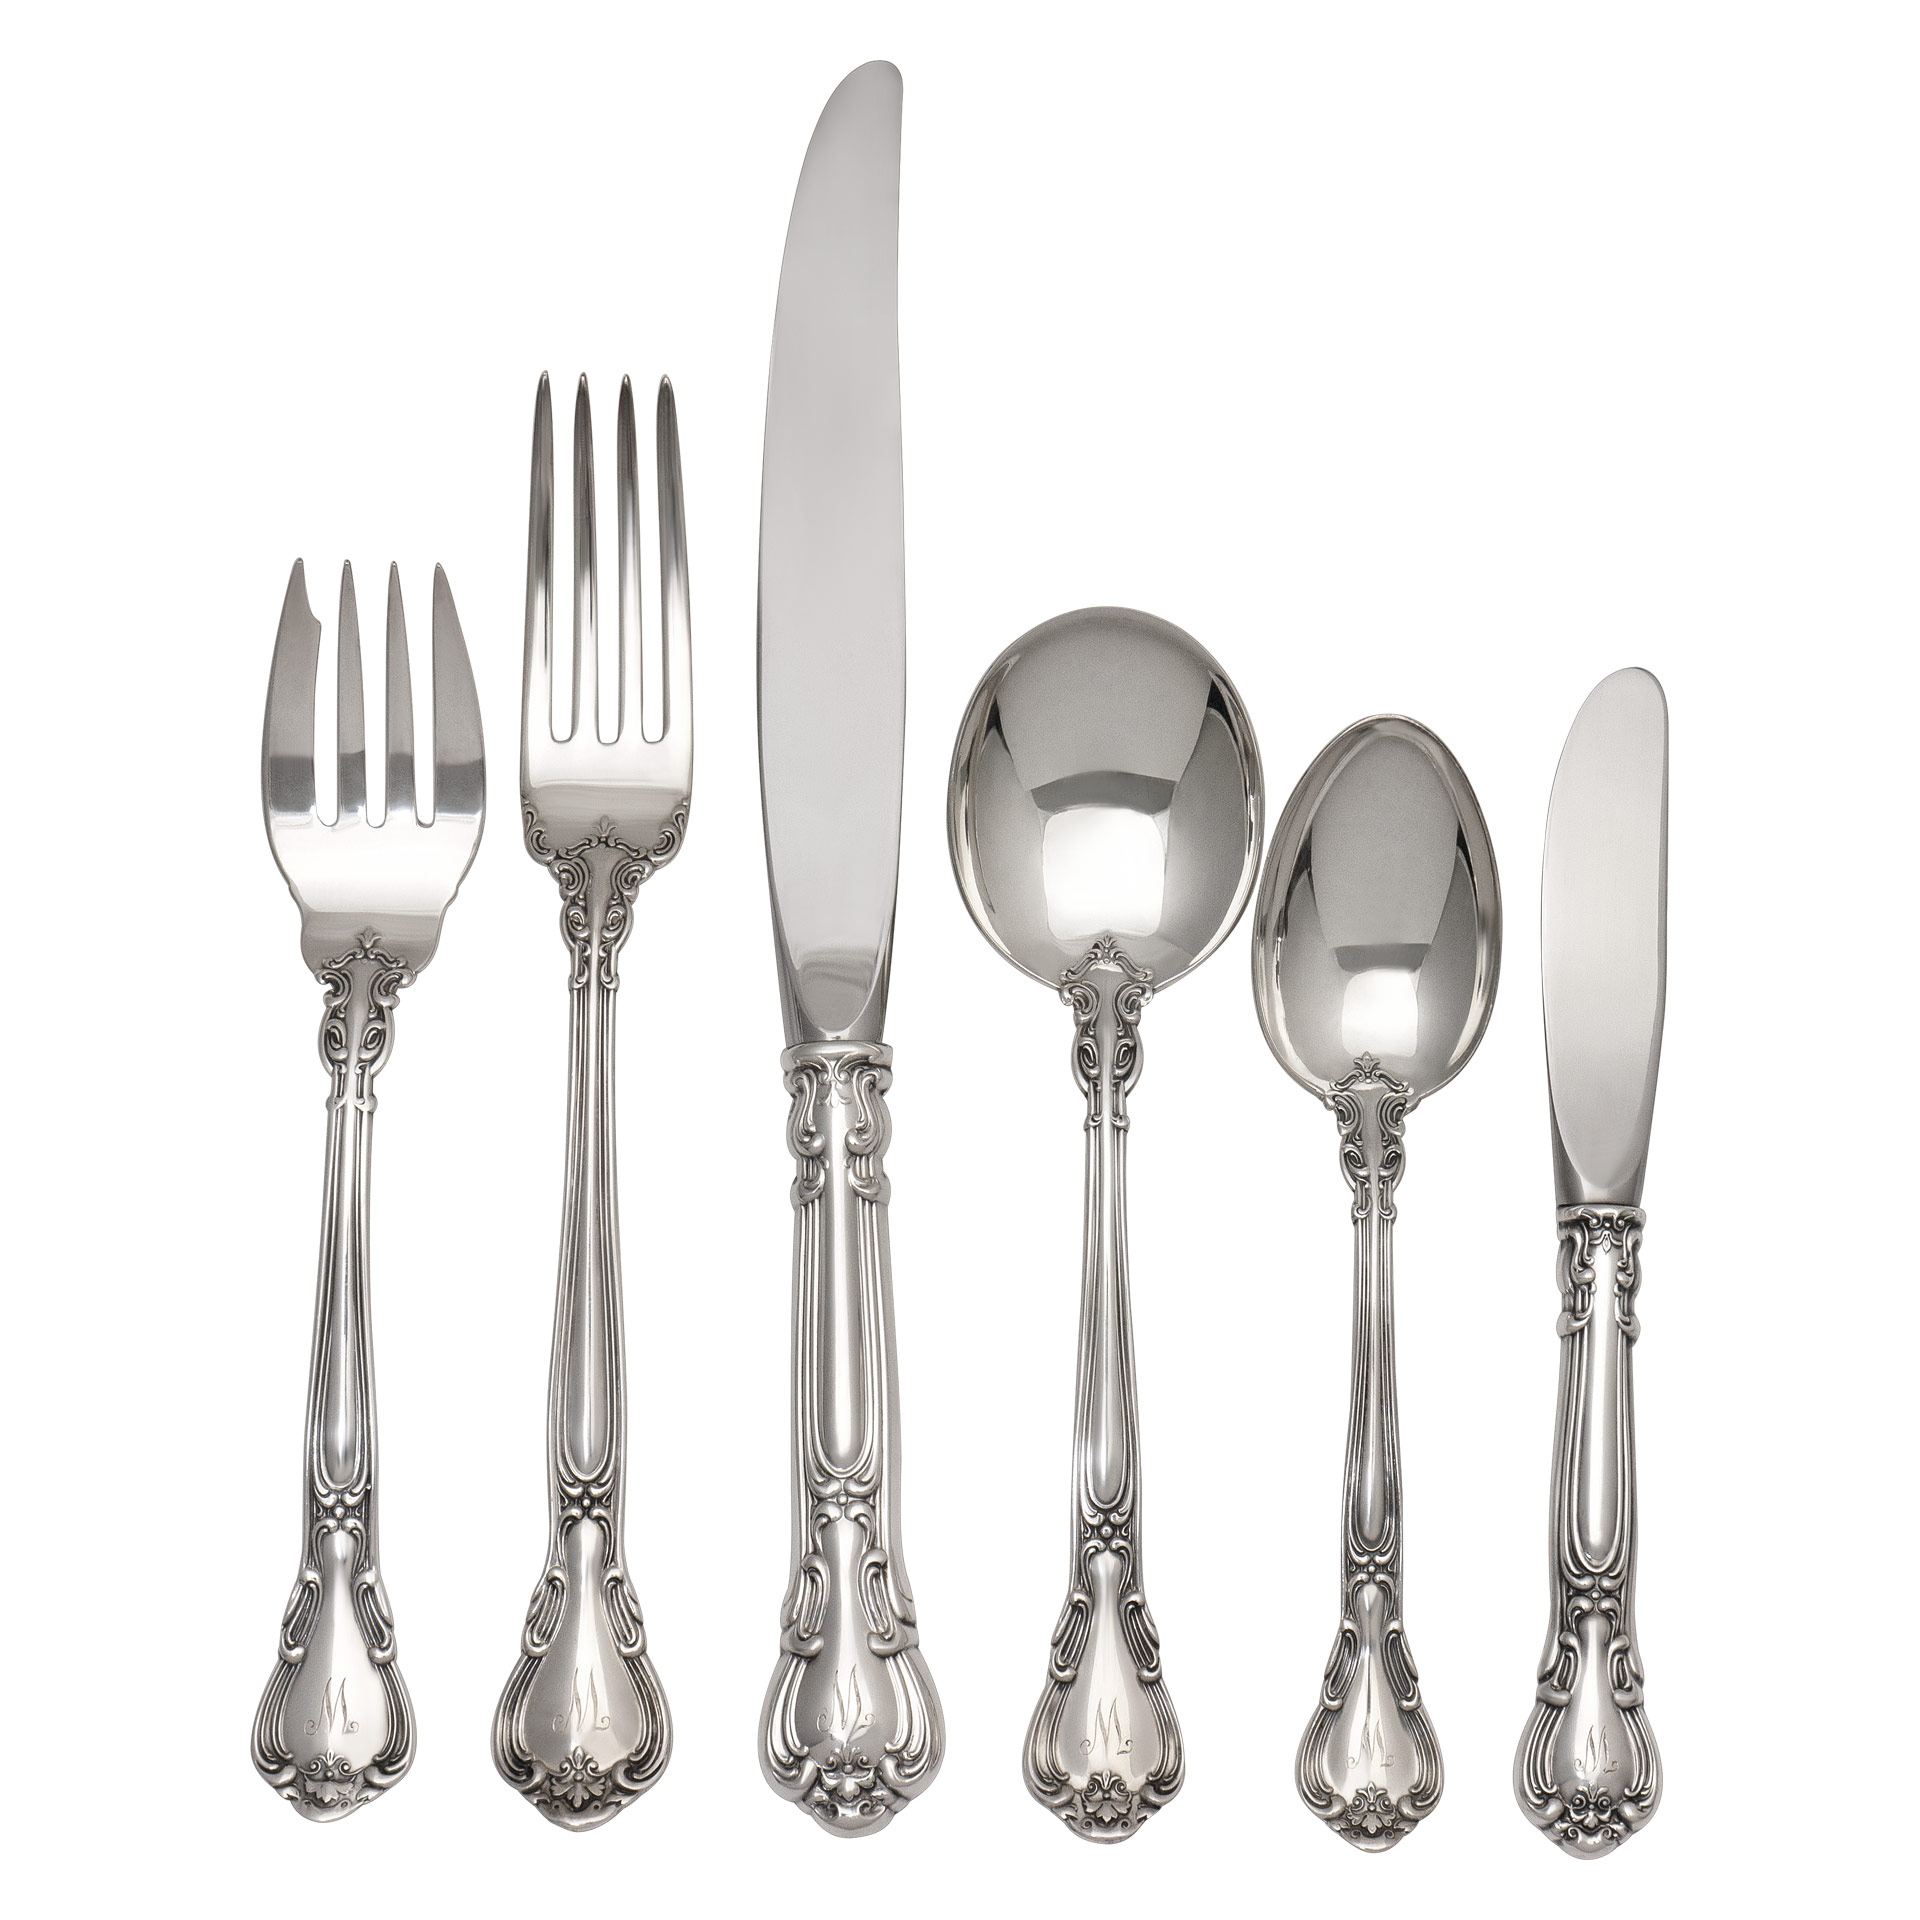 "CHANTILLY" sterling silver flatware set patented in 1895 by Gorham. 6 place settings for 8 with 6 serving pieces. Great beginner set. image 1